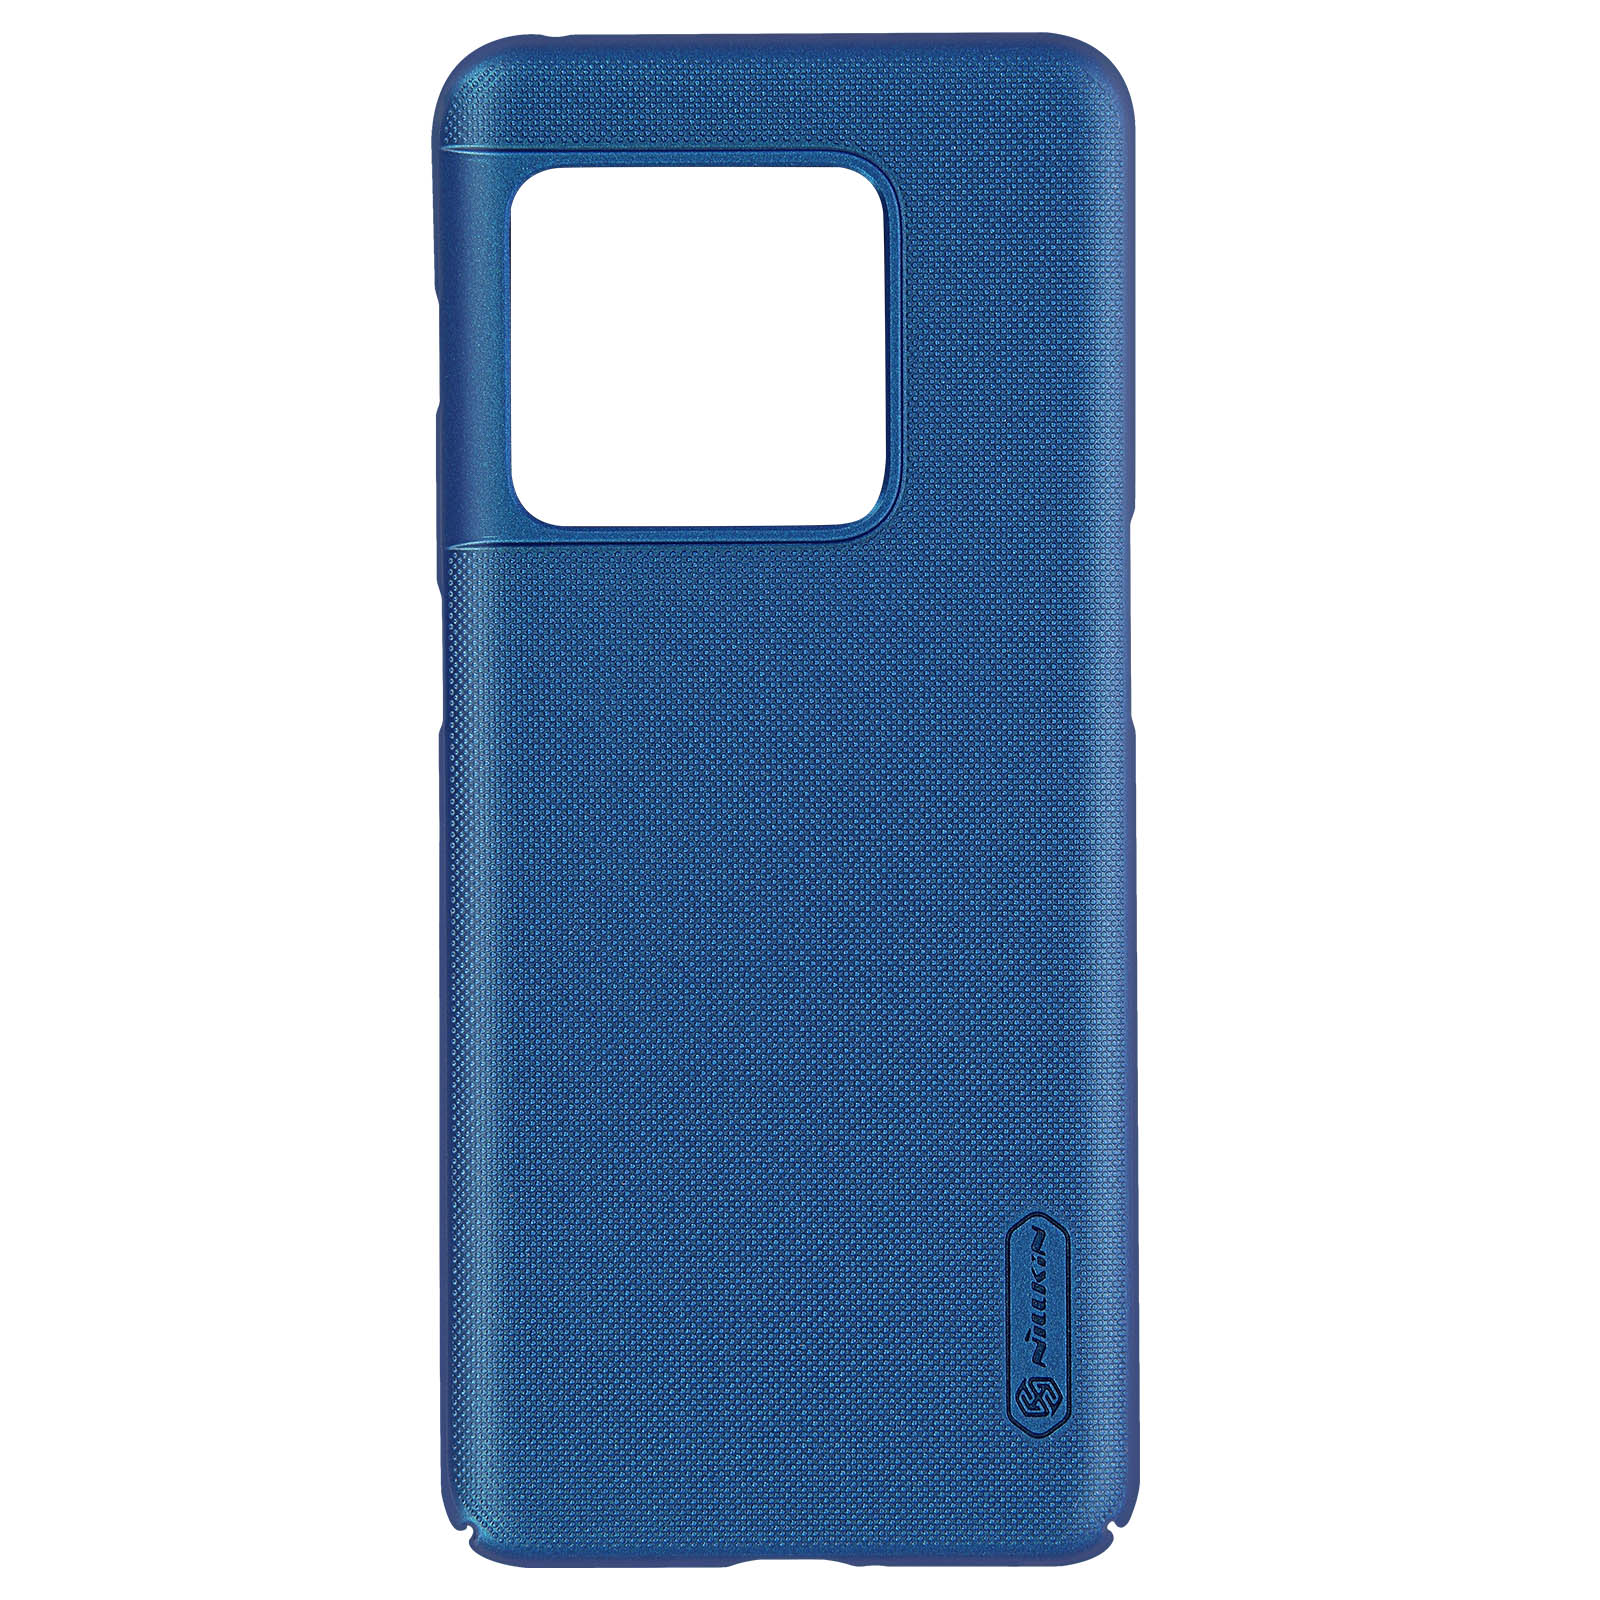 NILLKIN Soft Touch Series, Blau 5G, OnePlus, 10 Backcover, Pro